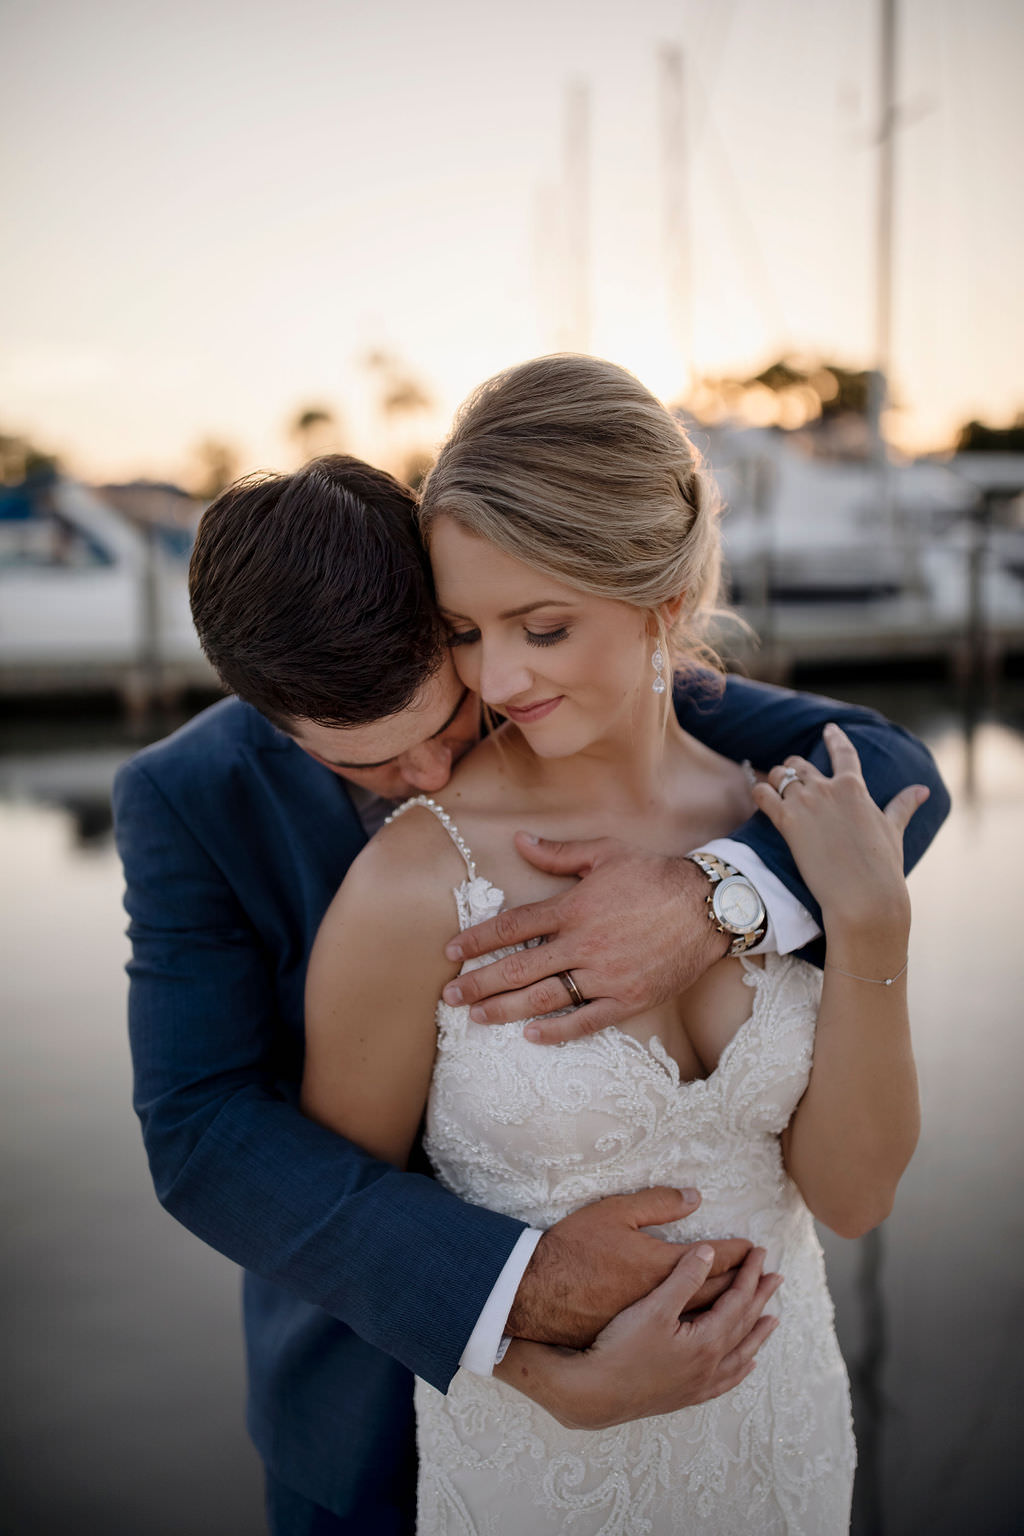 Waterfront Yacht Boat Dock Intimate Sunset Bride and Groom Wedding Portrait | Tampa Bay Wedding Venue The Resort at Longboat Key Club